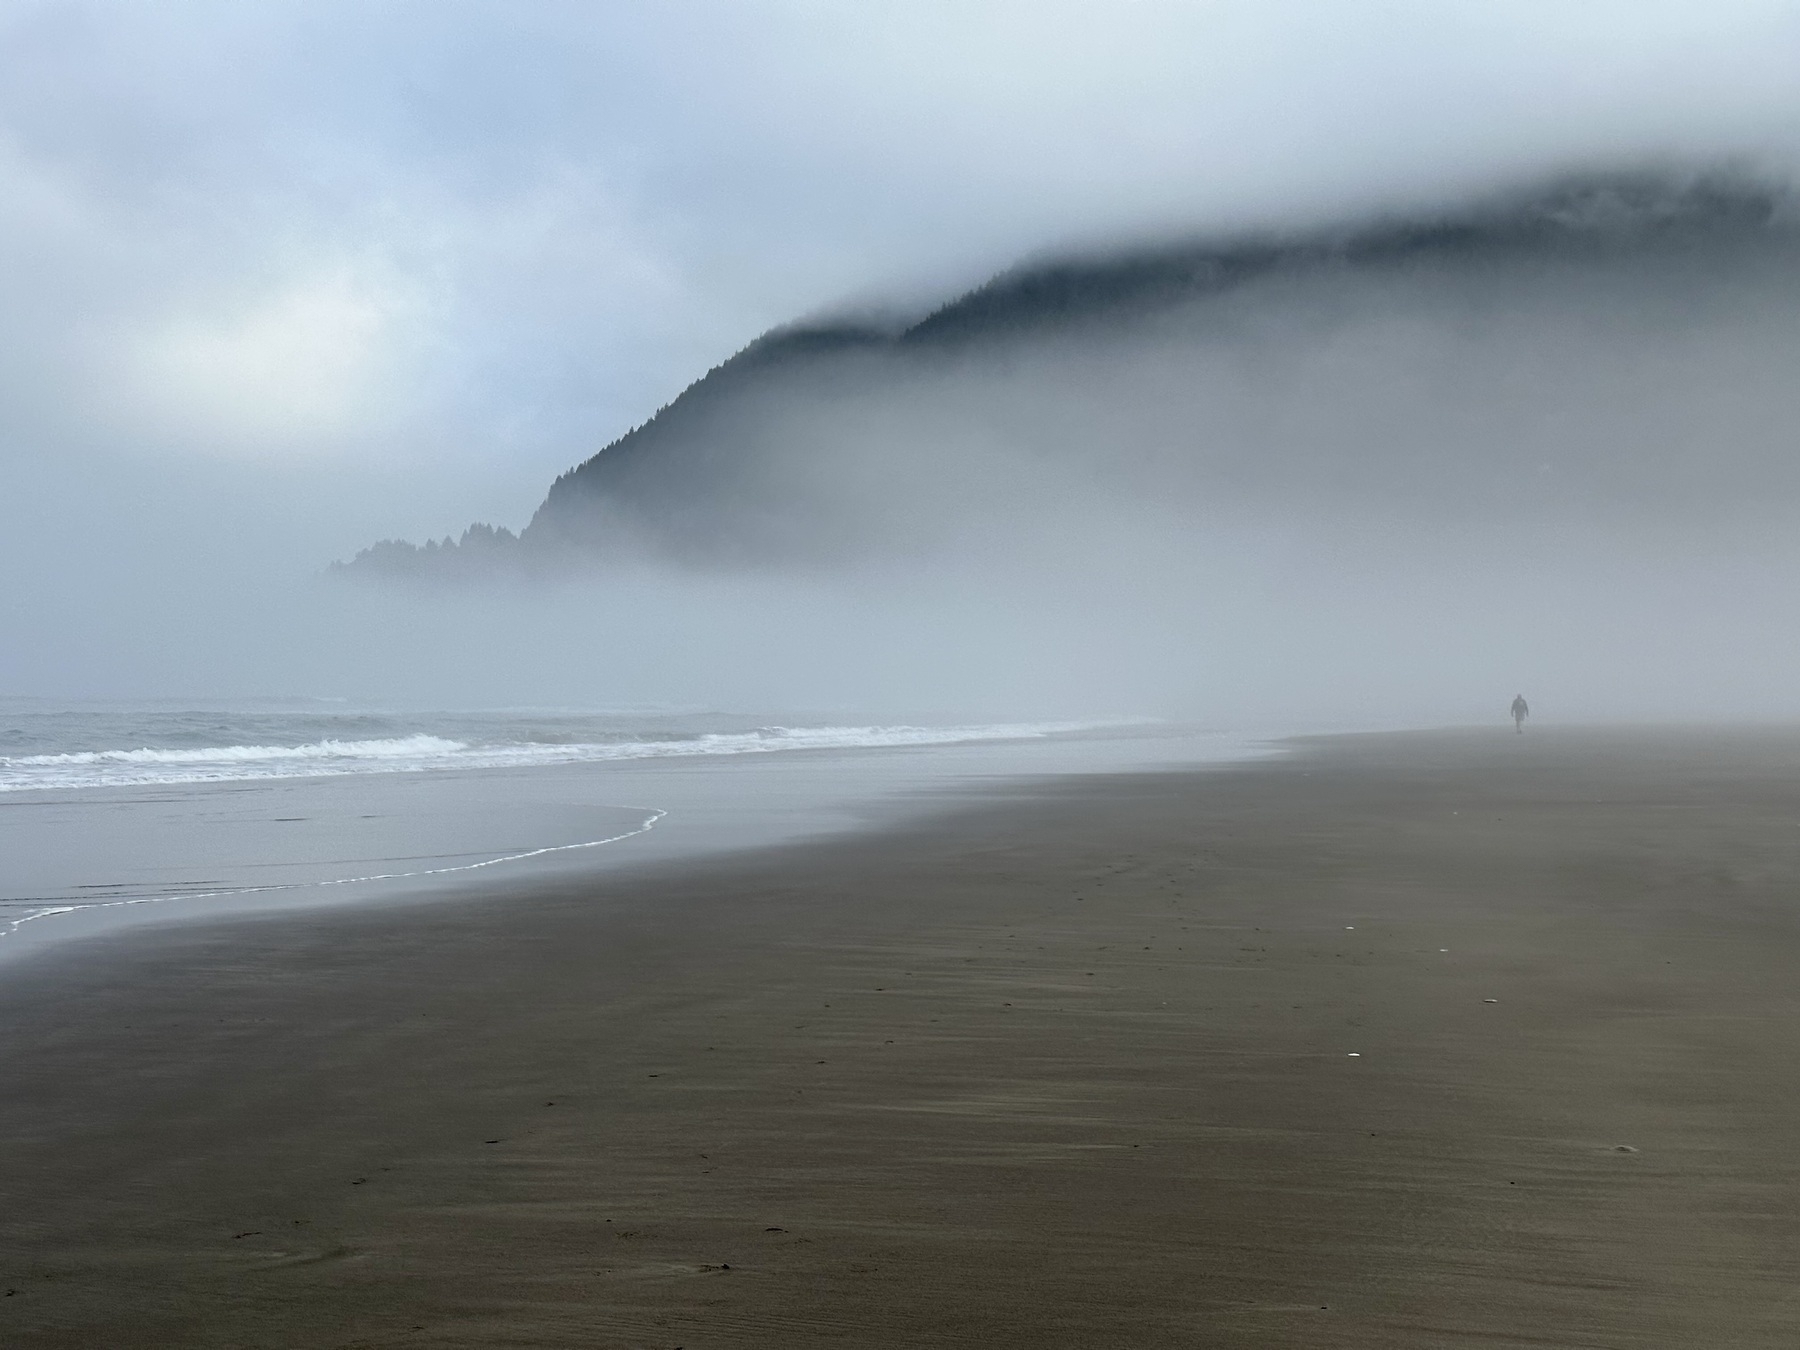 Pacific coast, with mountain in background mostly obscured by clouds, one solitary human figure visible in the mist.